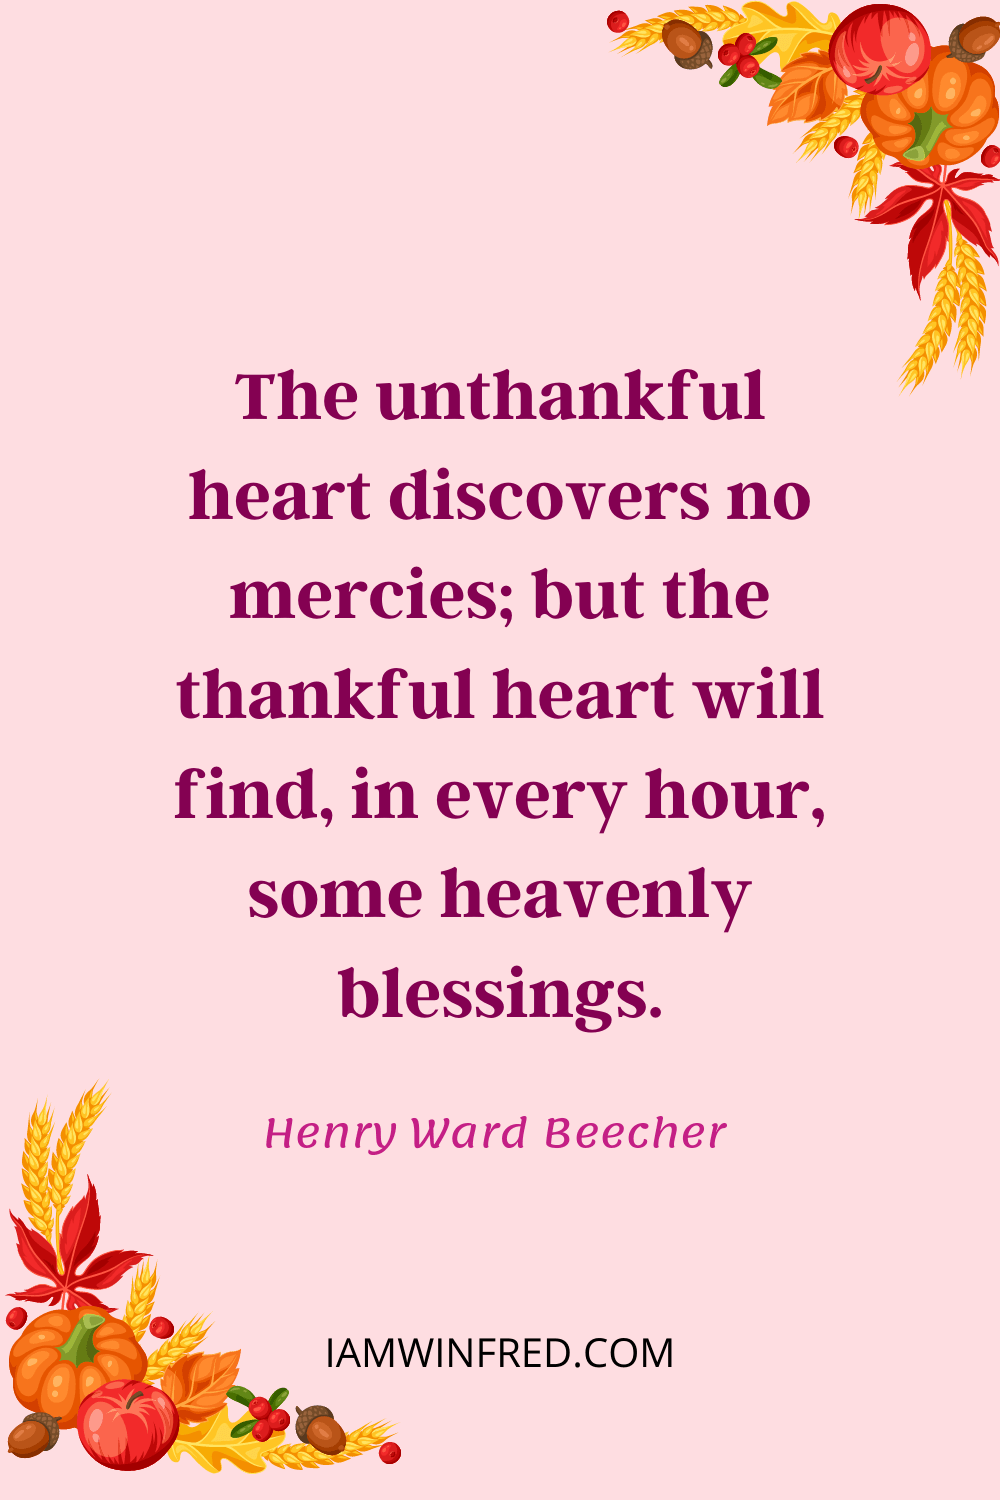 The Unthankful Heart Discovers No Mercies But The Thankful Heart Will Find In Every Hour Some Heavenly Blessings